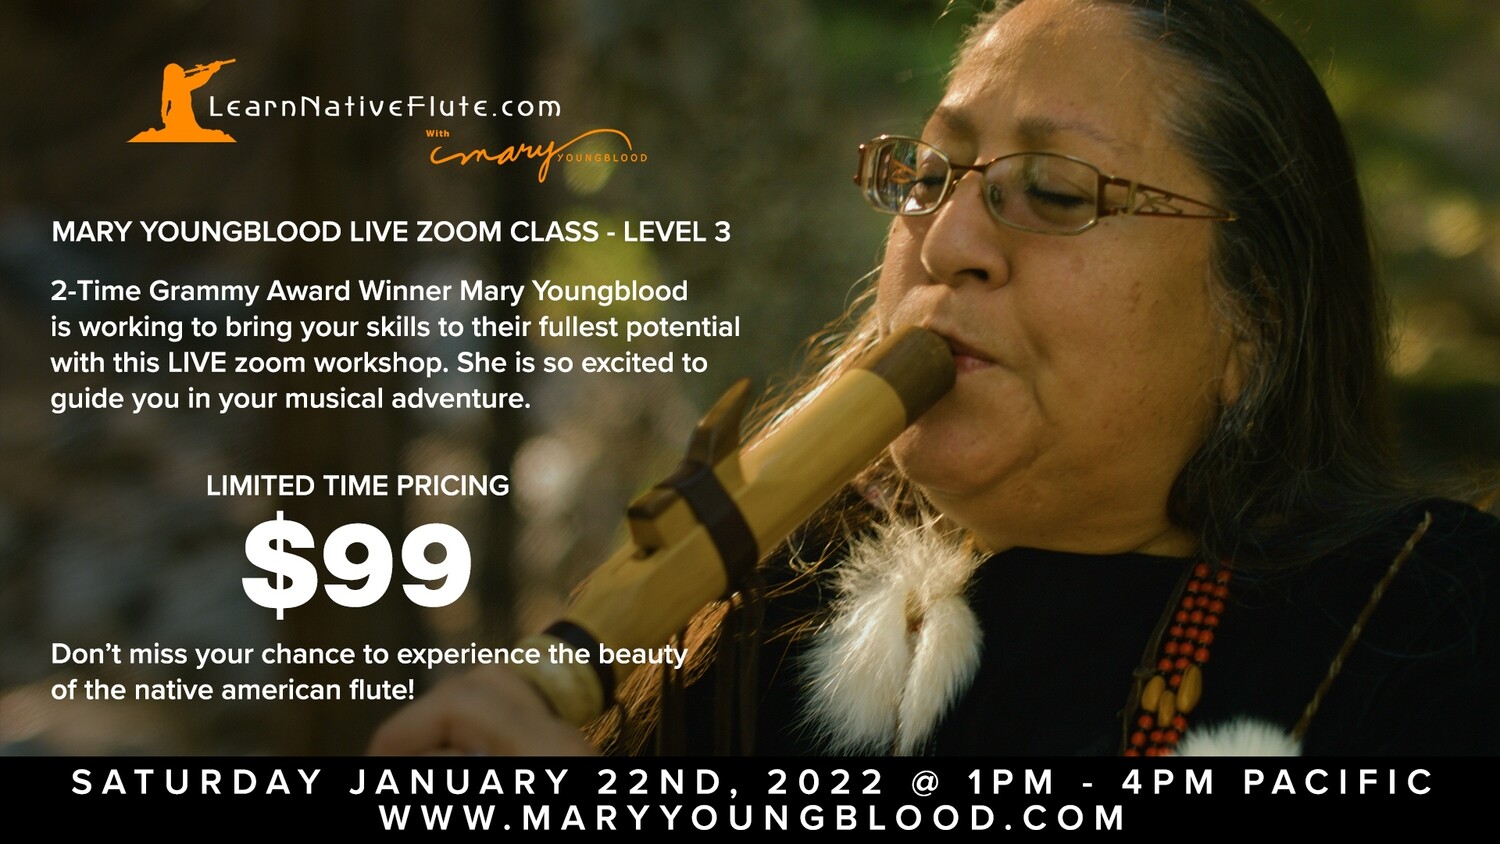 Mary Youngblood Zoom Group Class Level 3 LIVE 1/22/2022